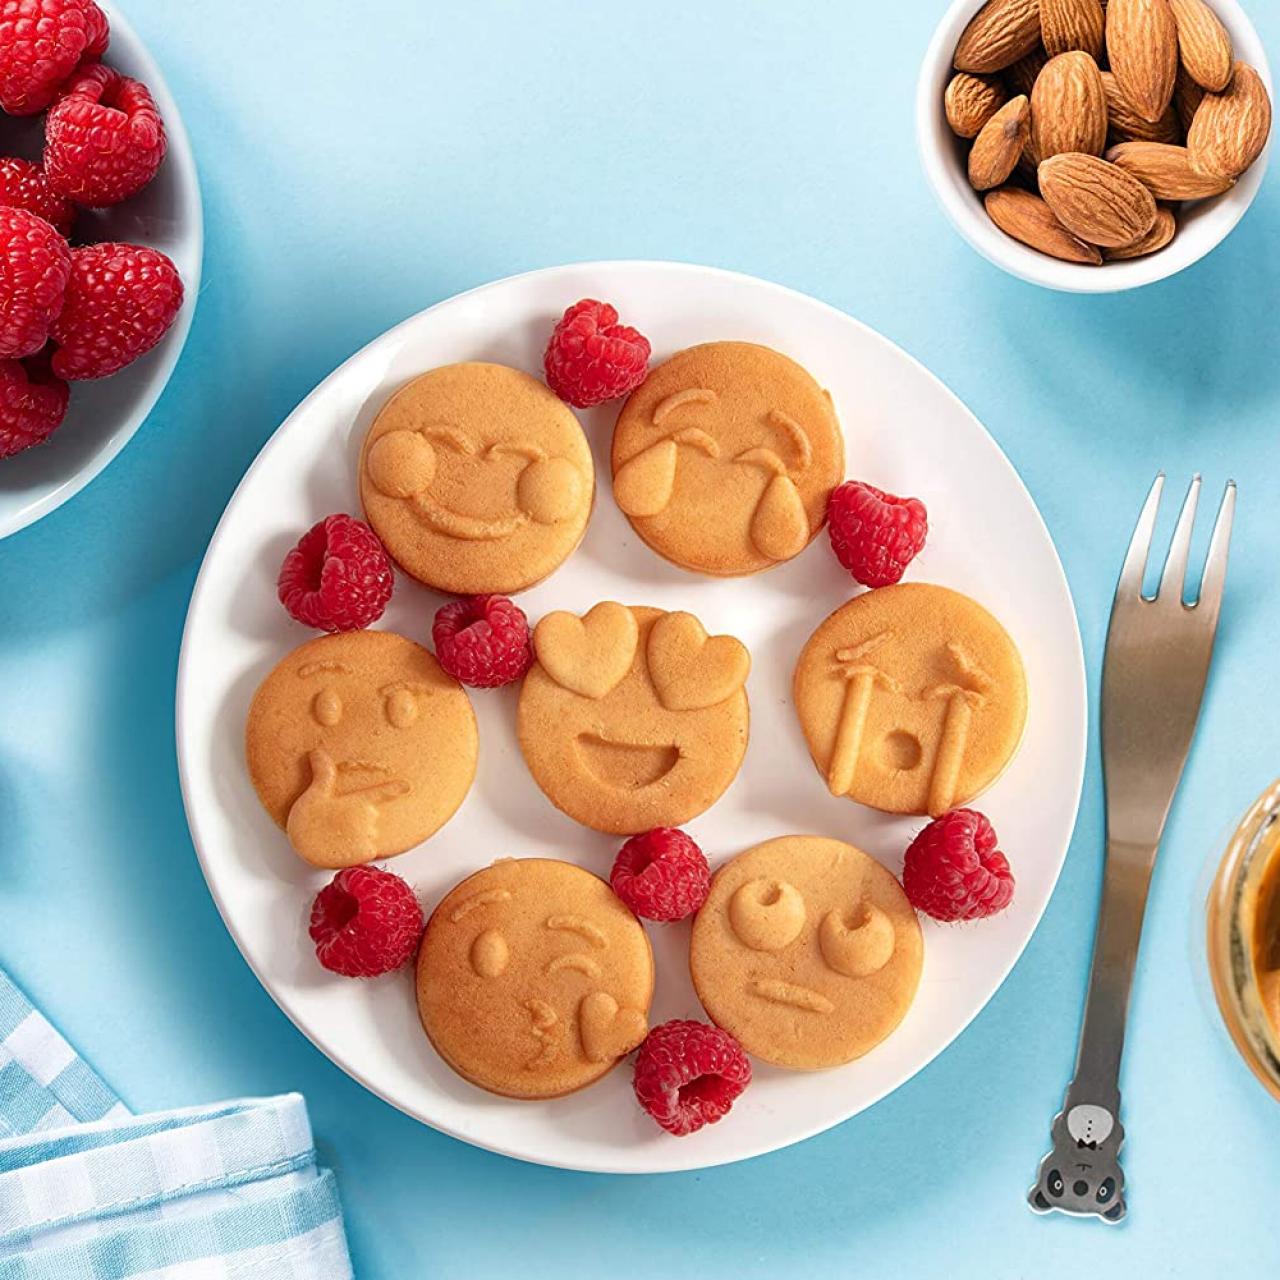 https://food.fnr.sndimg.com/content/dam/images/food/products/2021/2/12/rx_mini-emojis-smiley-faces-waffle-maker.jpeg.rend.hgtvcom.1280.1280.suffix/1613144766648.jpeg